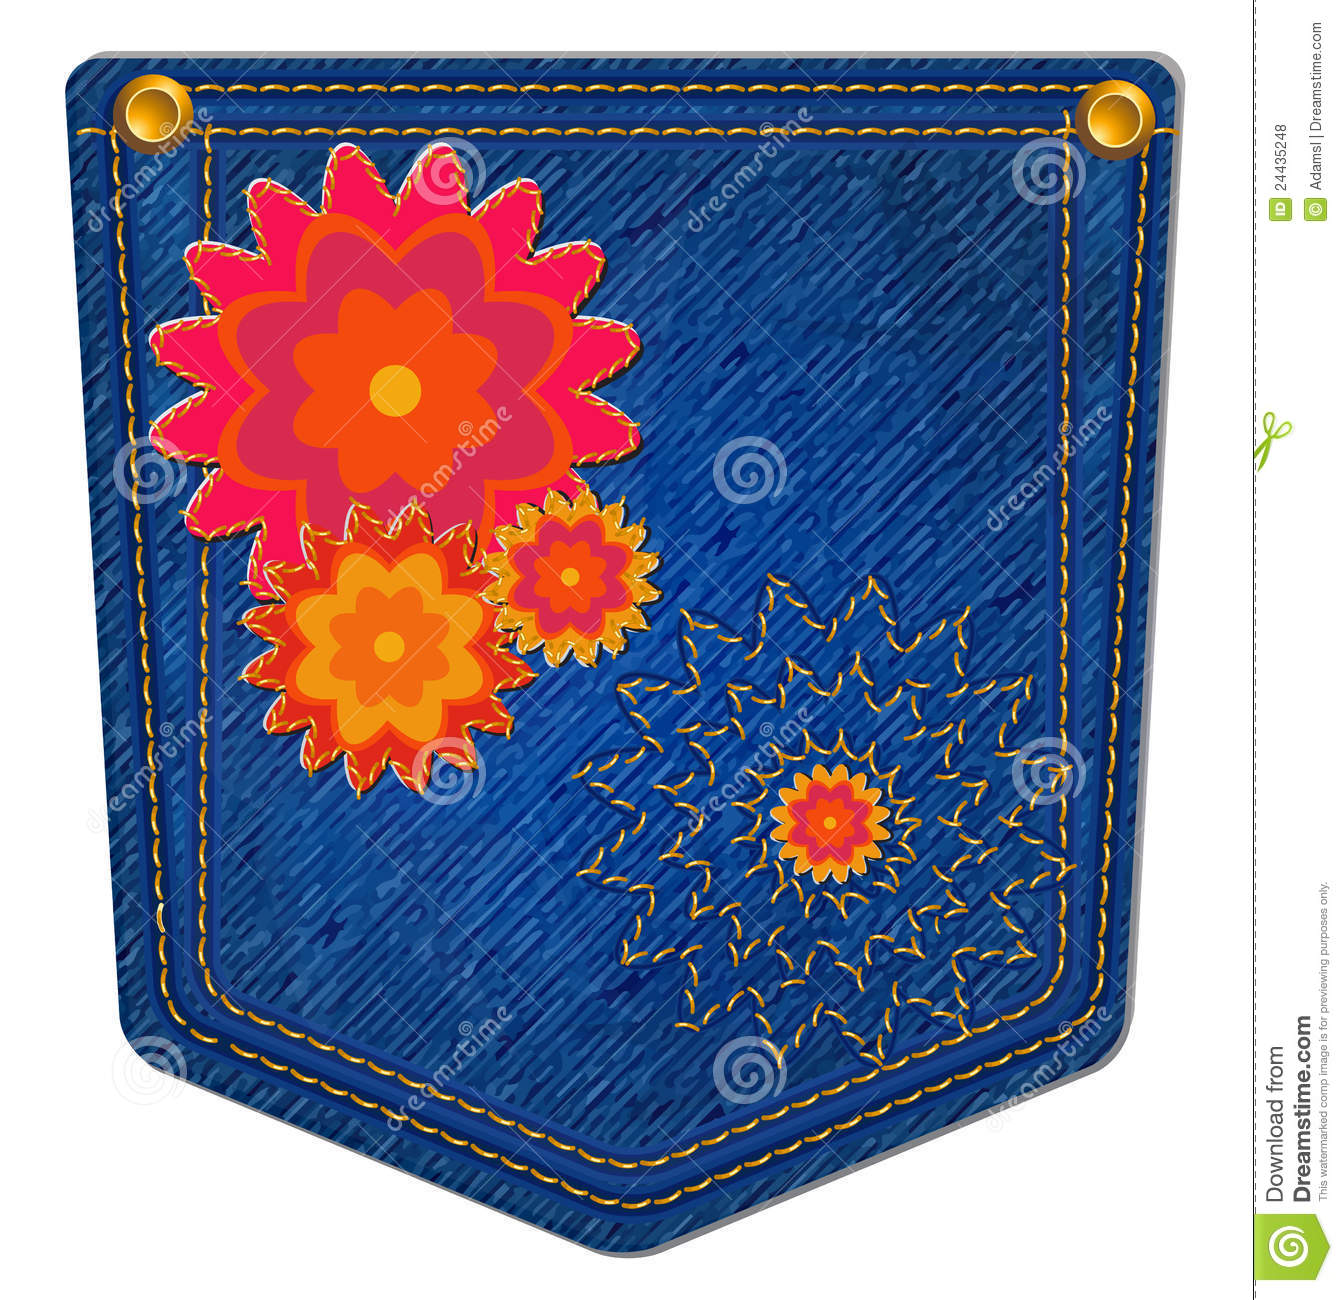 Jean Pocket Decorated With Bright Flowers And Gold Stitching